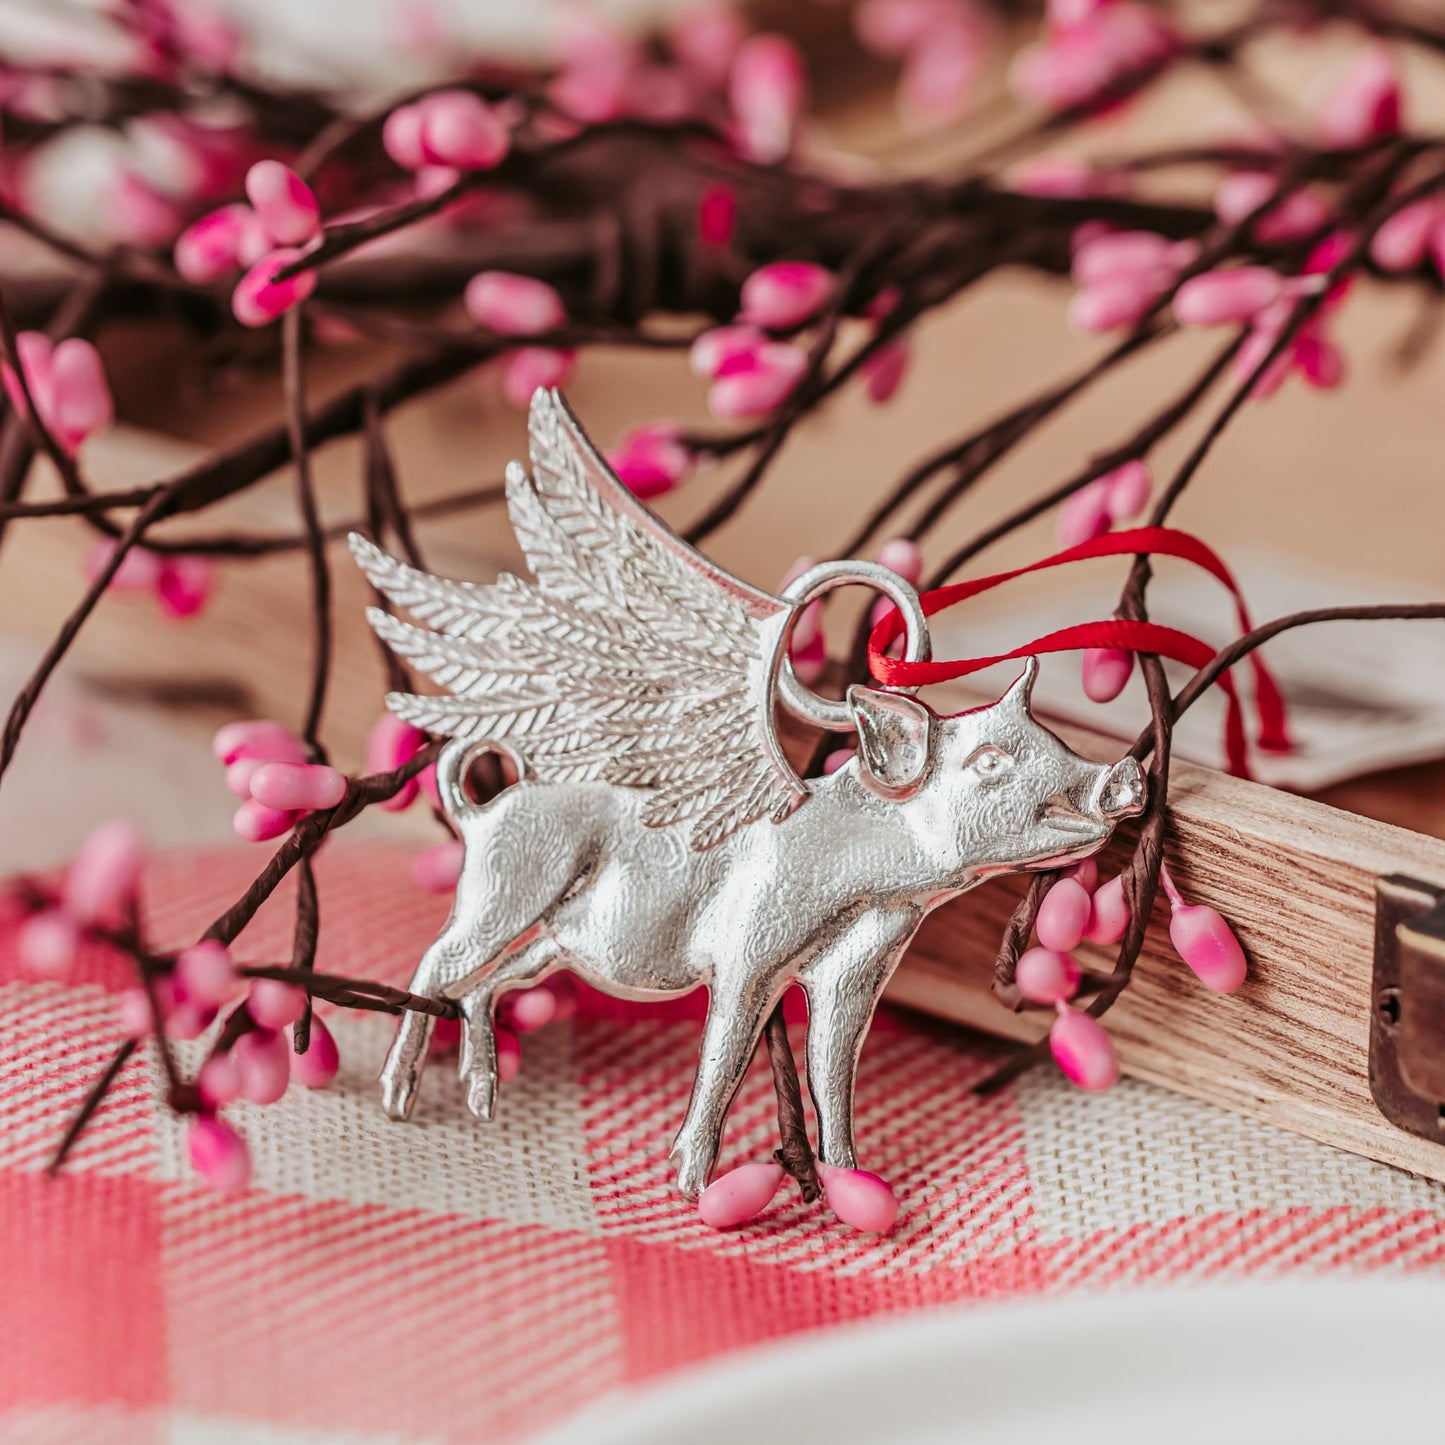 Pigs Fly Ornament